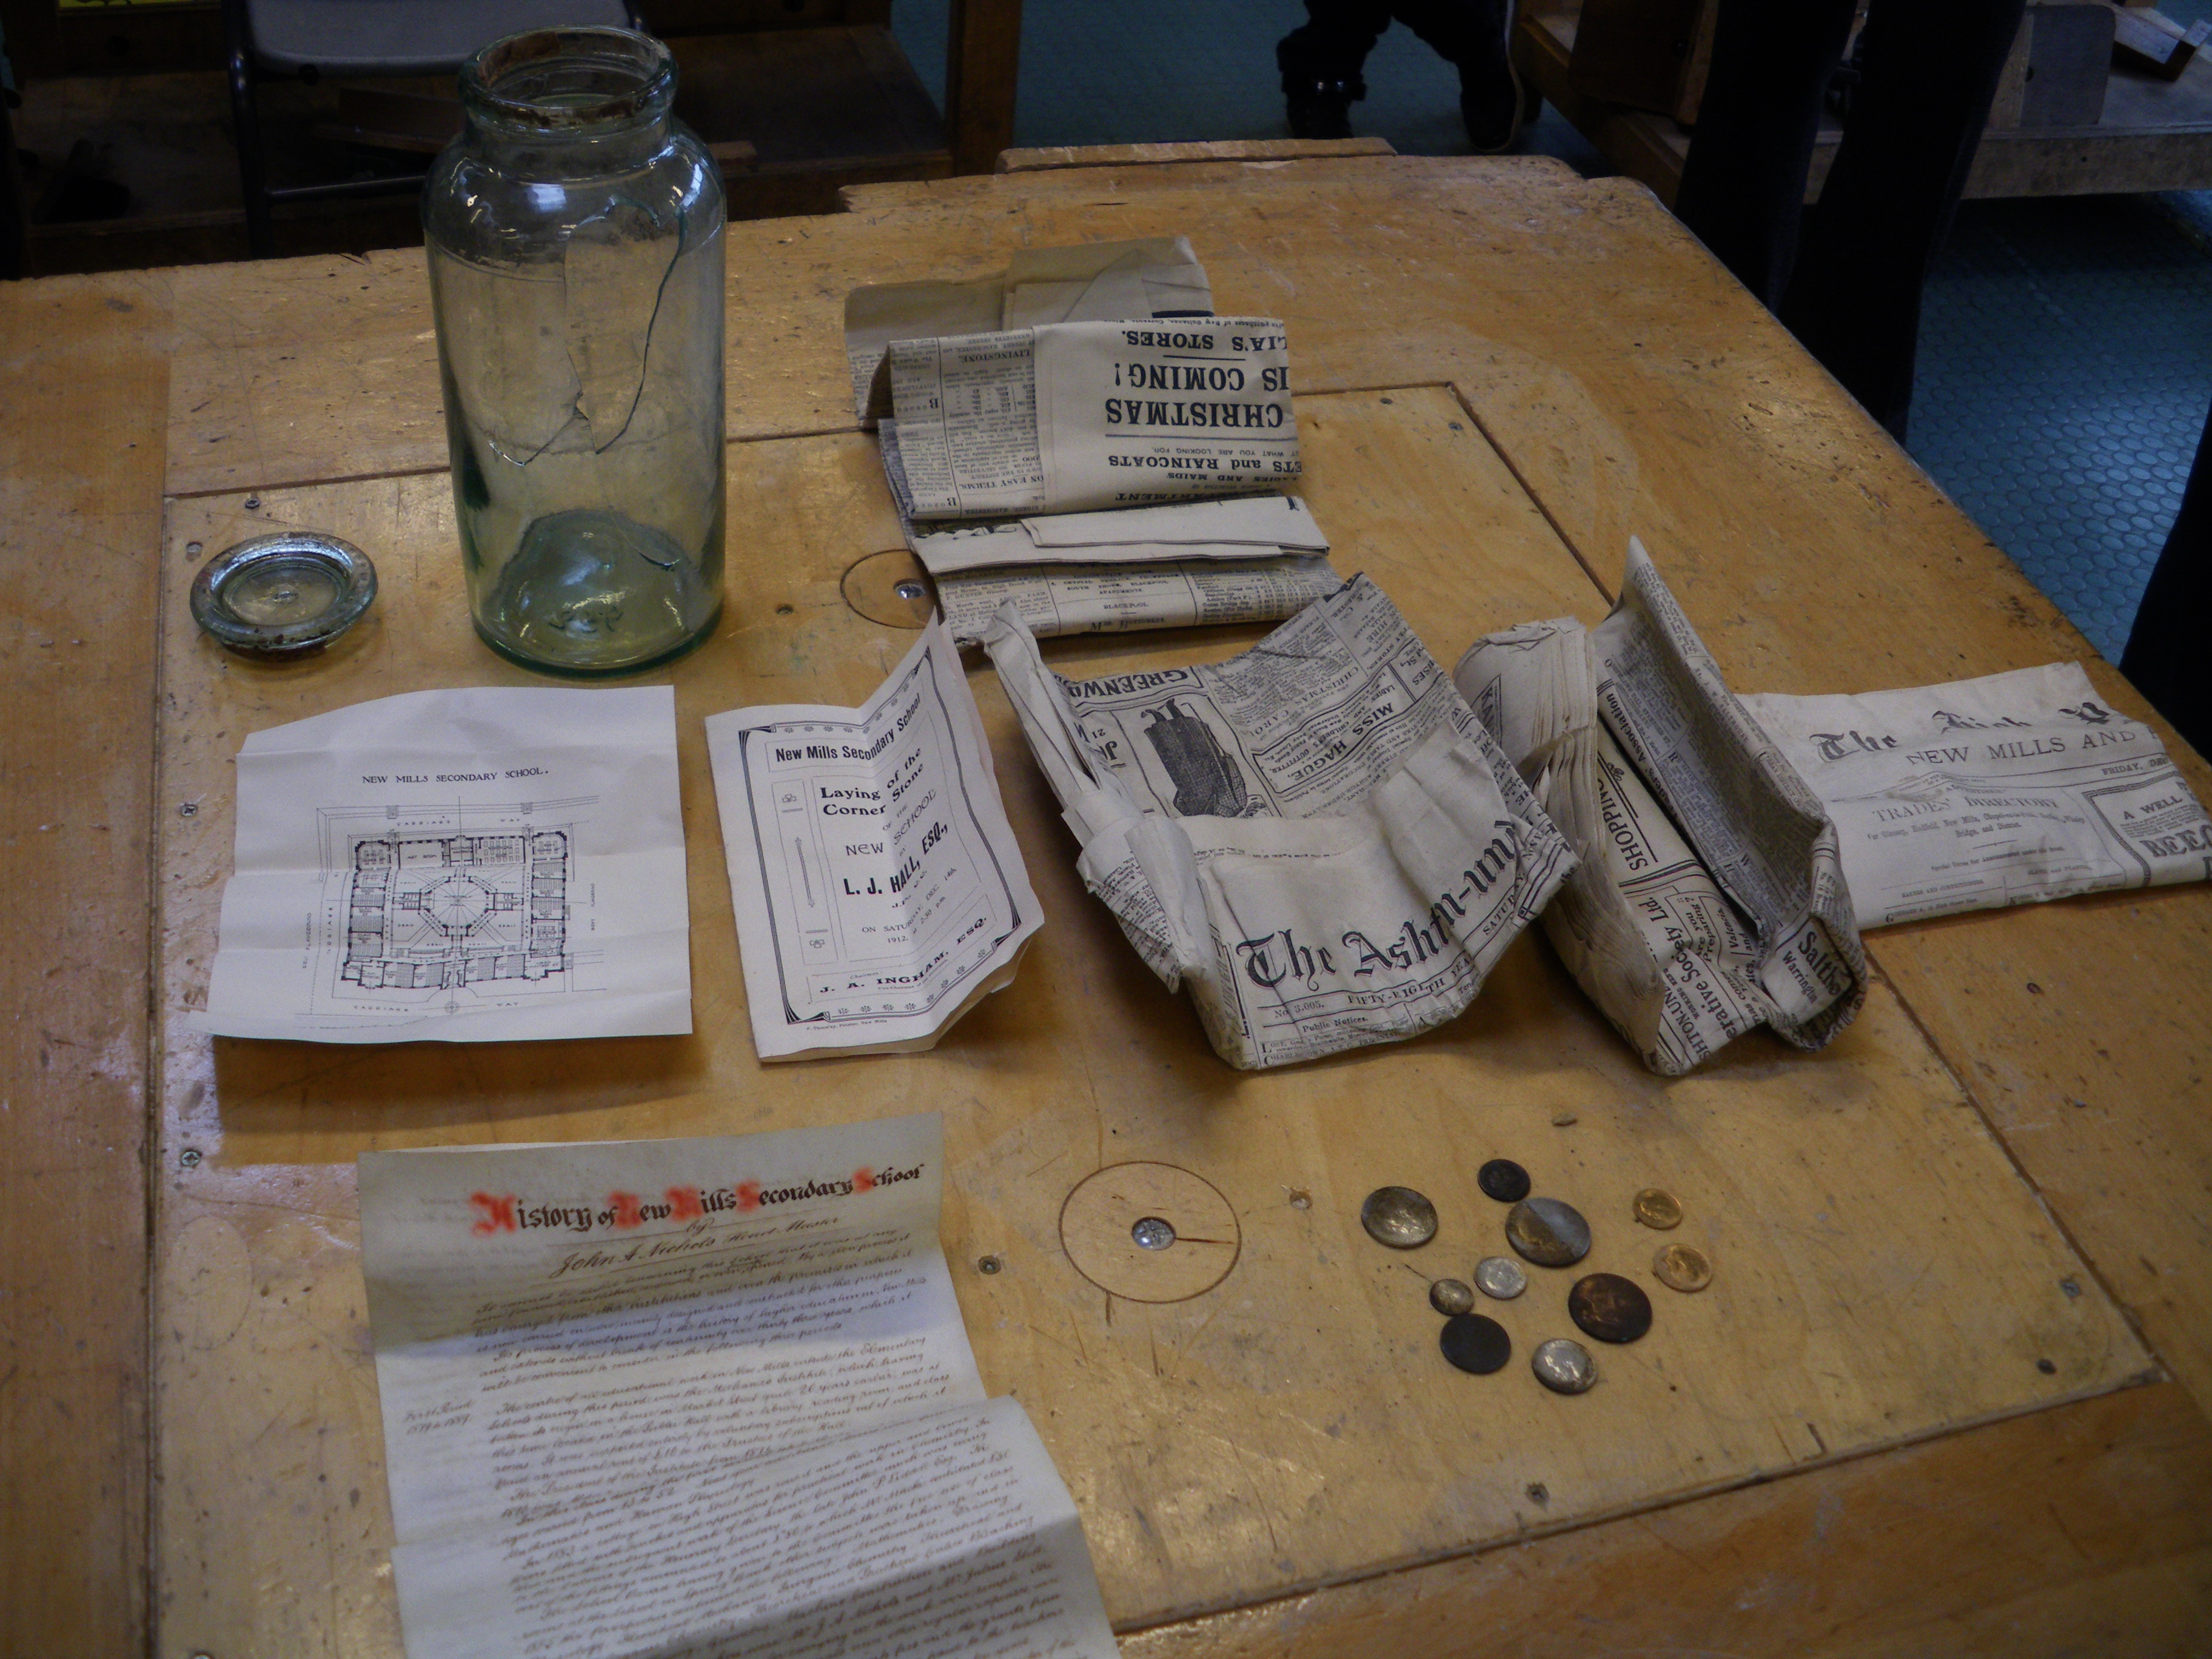 The Time Capsule jar and its contents